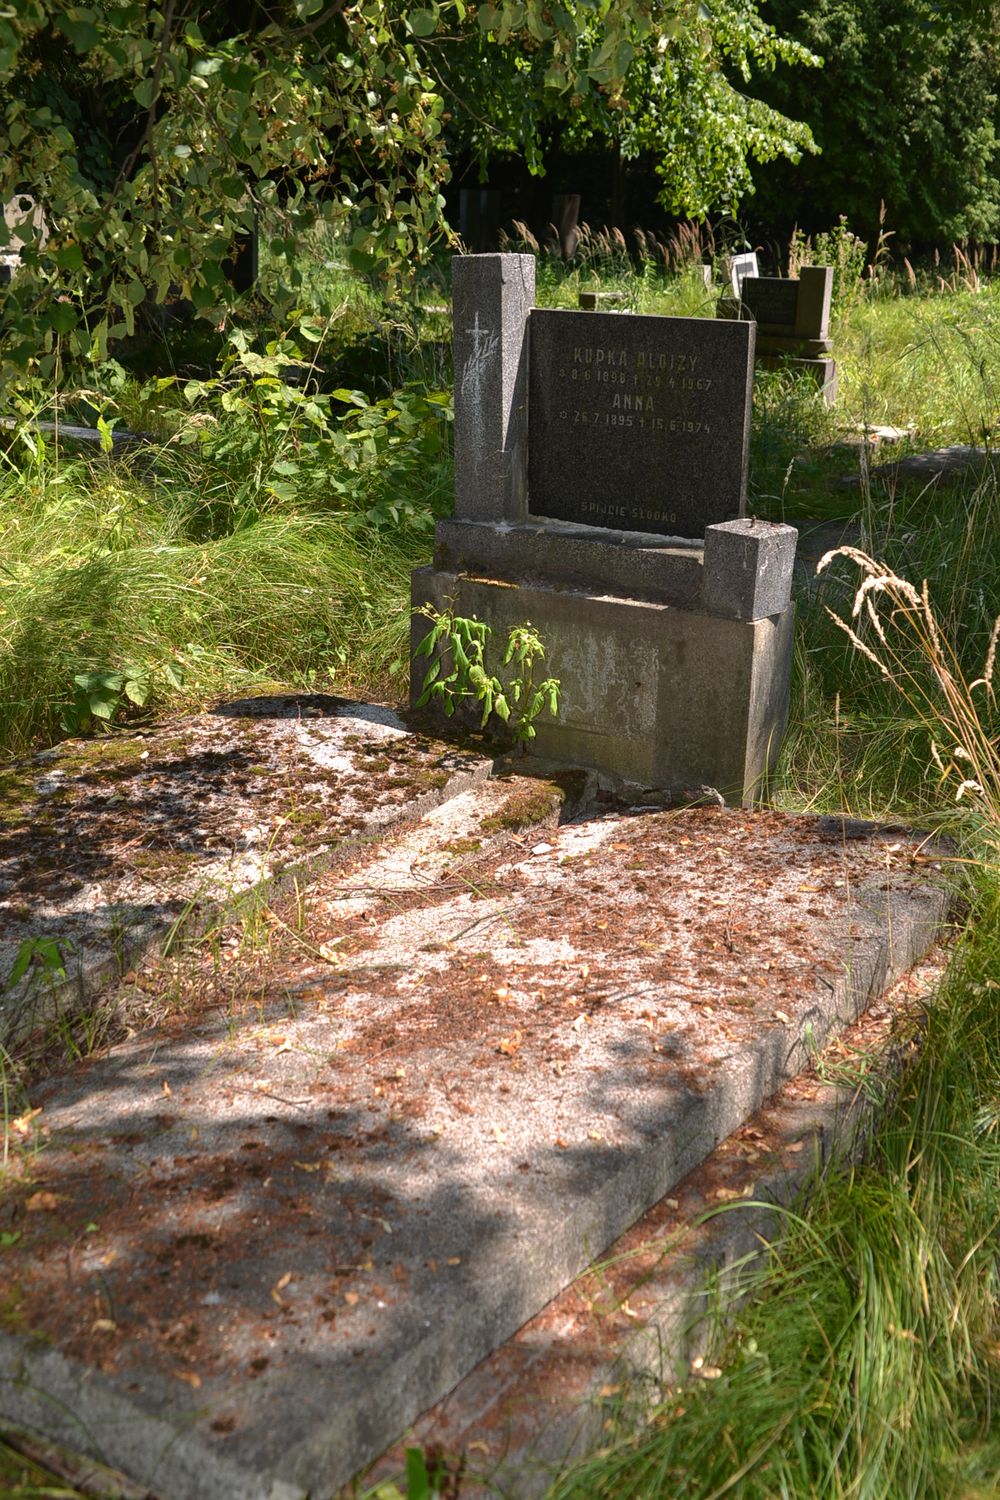 Tomb of Aloise and Anna Kupka, cemetery in Karviná Mexico, Czech Republic, as of 2022